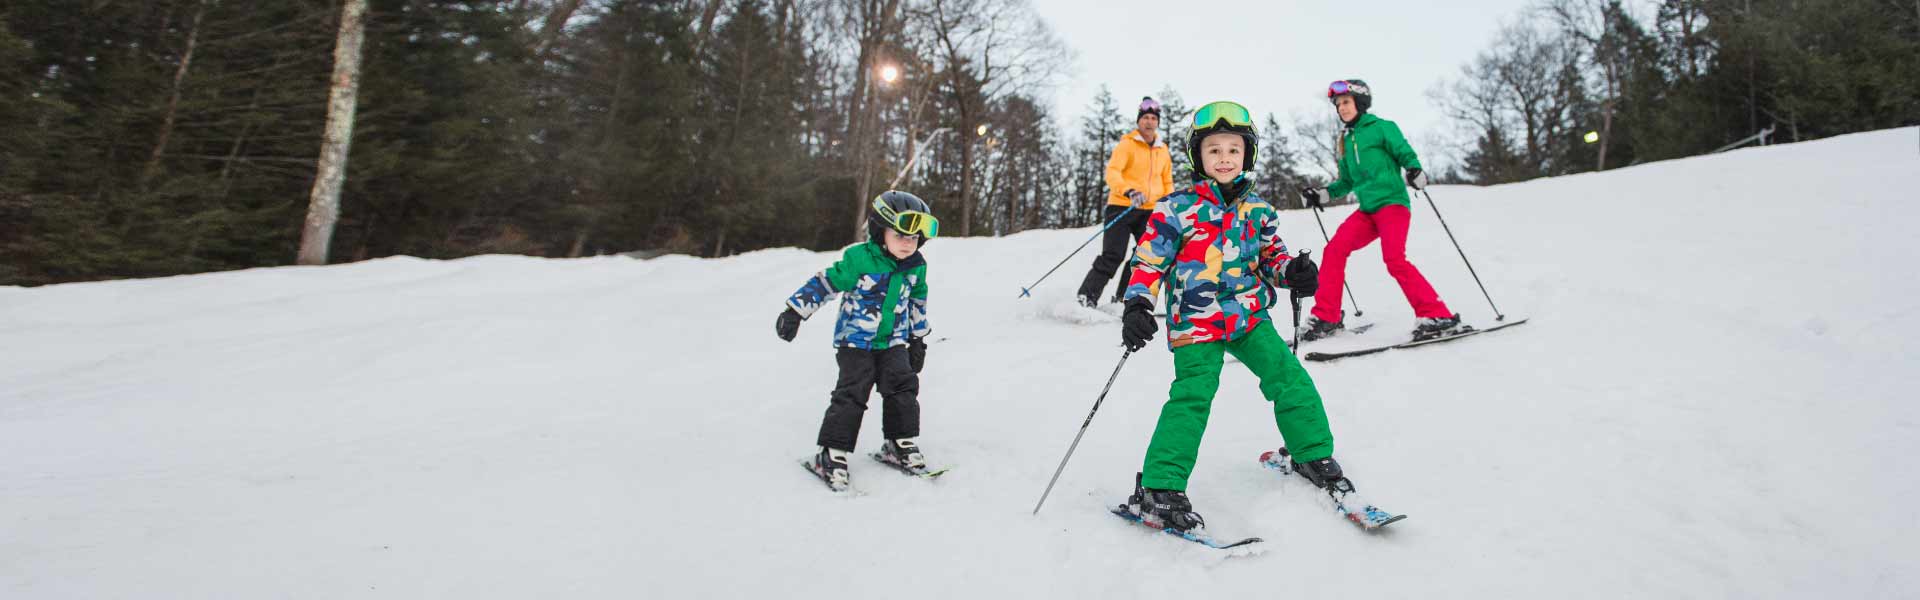 Young family of skiers enjoying the slopes.